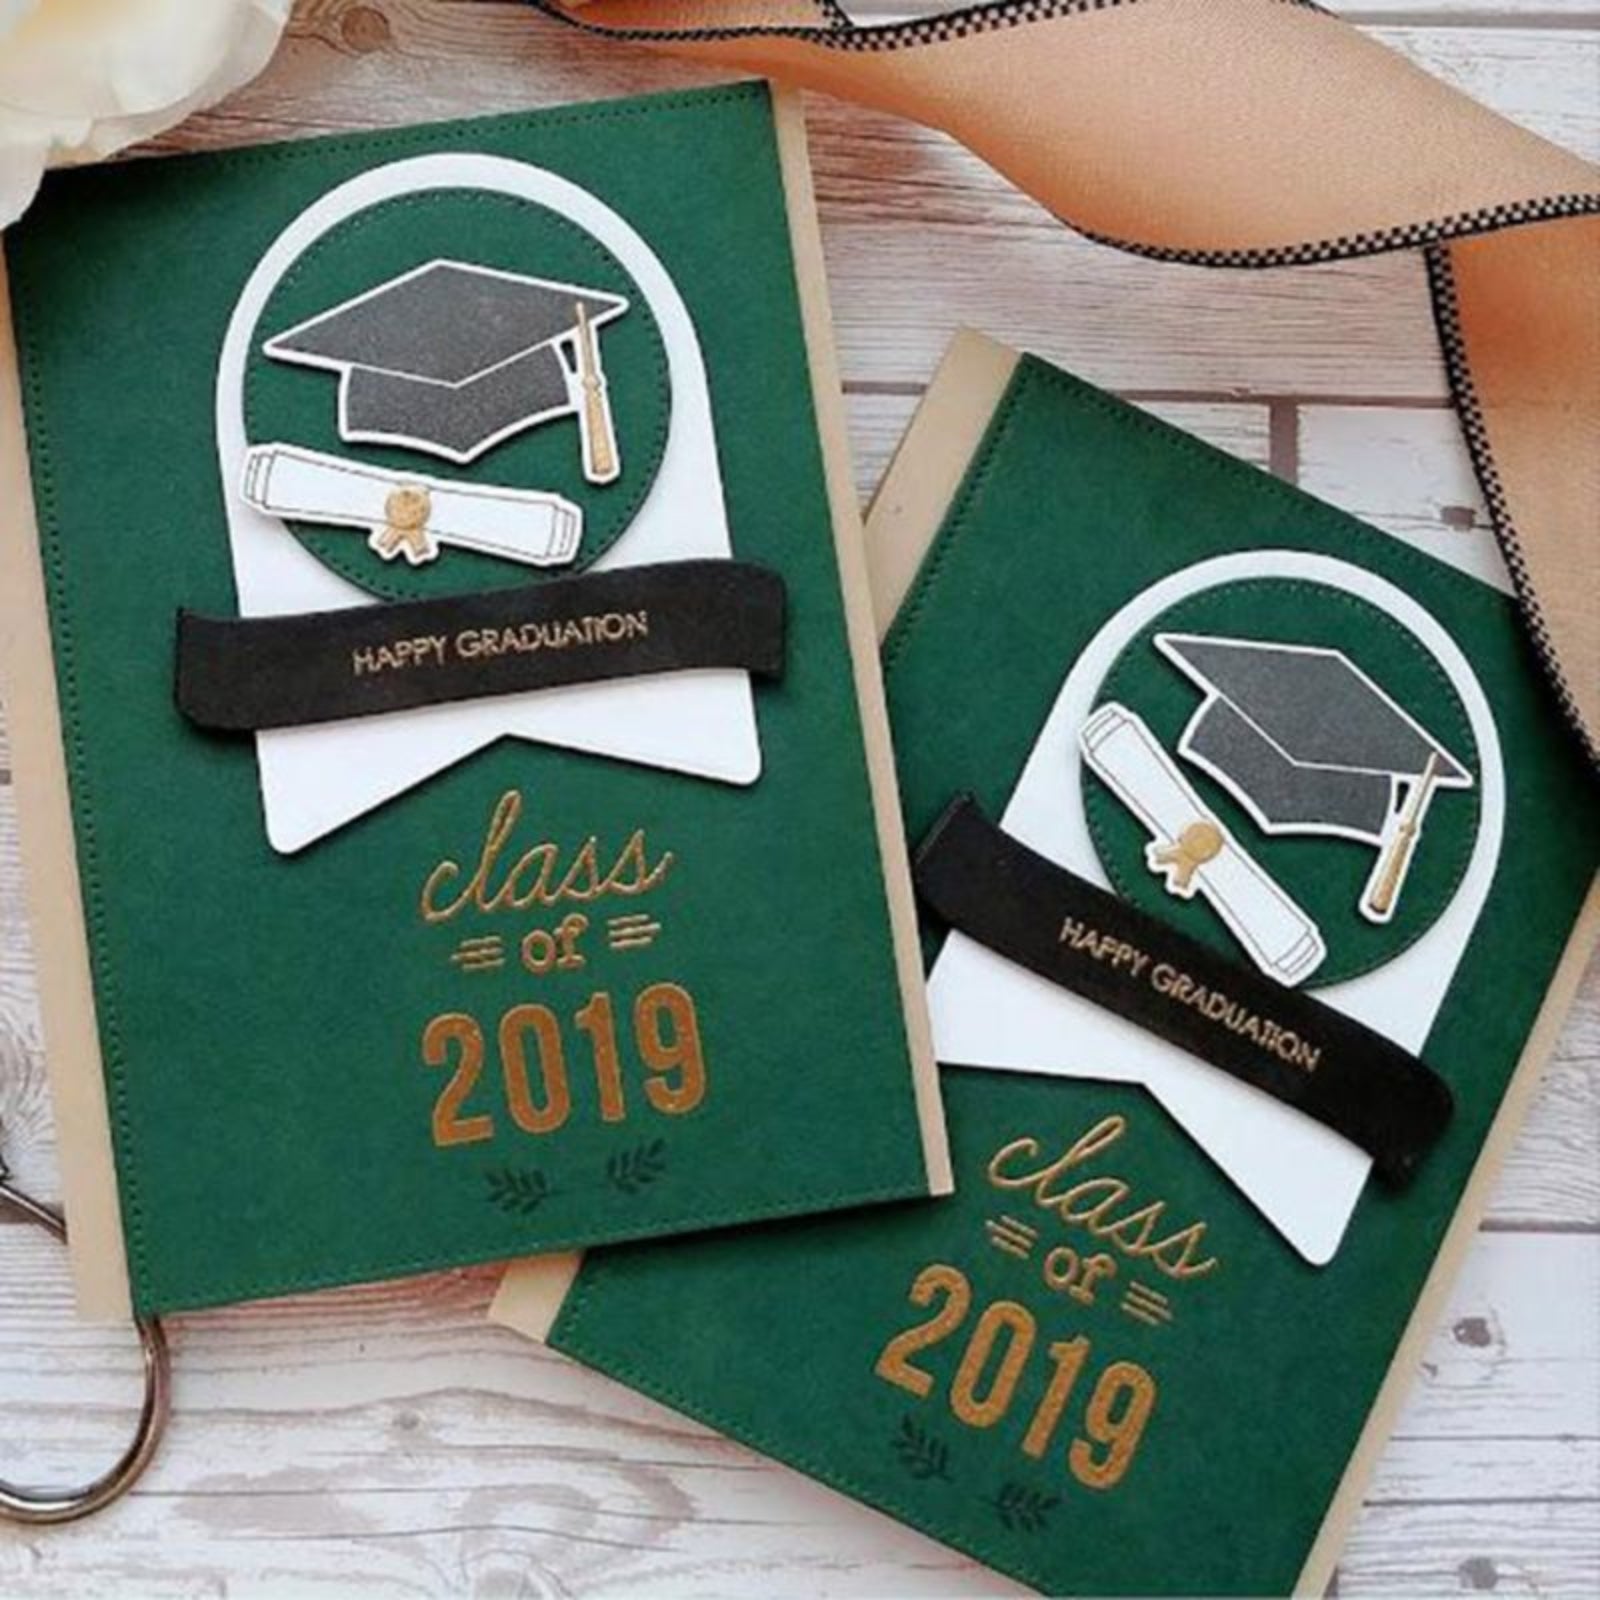 Hats Off To You Graduate Cutting Dies and Stamps Set